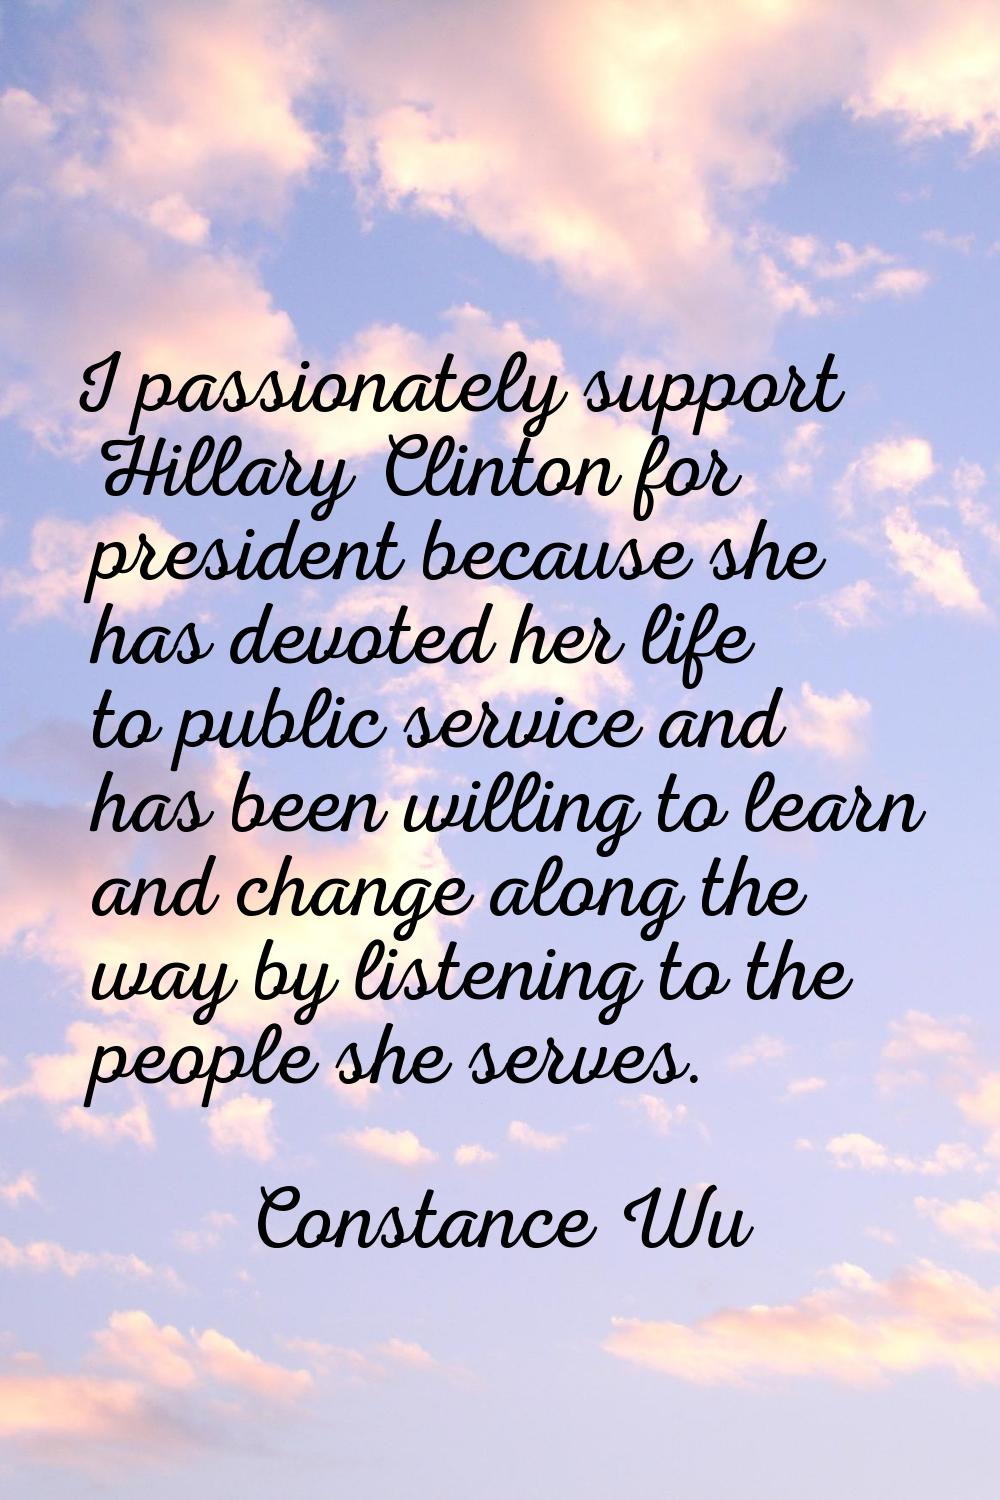 I passionately support Hillary Clinton for president because she has devoted her life to public ser